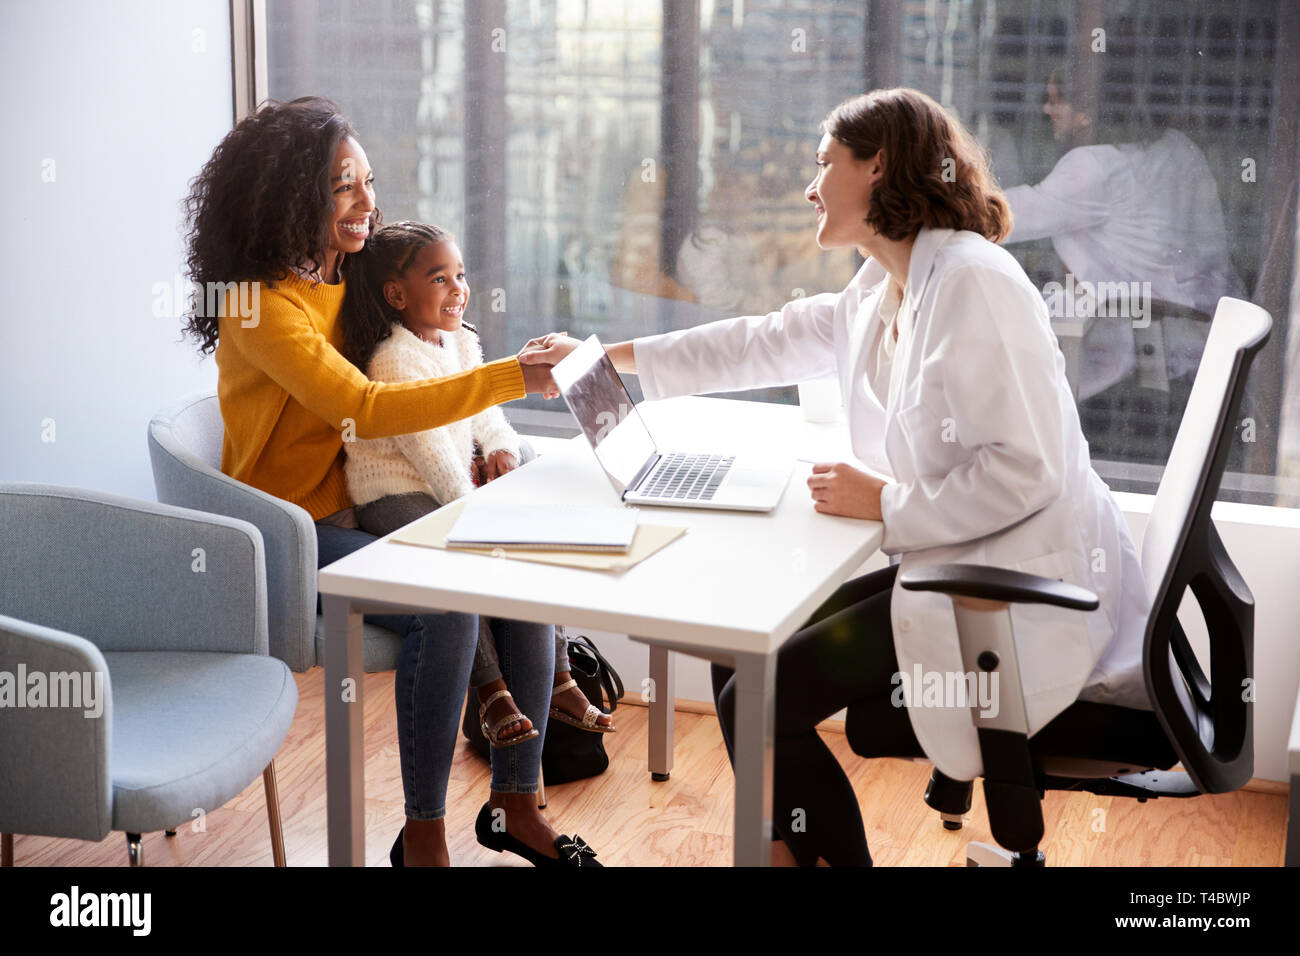 Female Pediatrician Shaking Hands With Mother And Daughter Meeting In Hospital Office Stock Photo